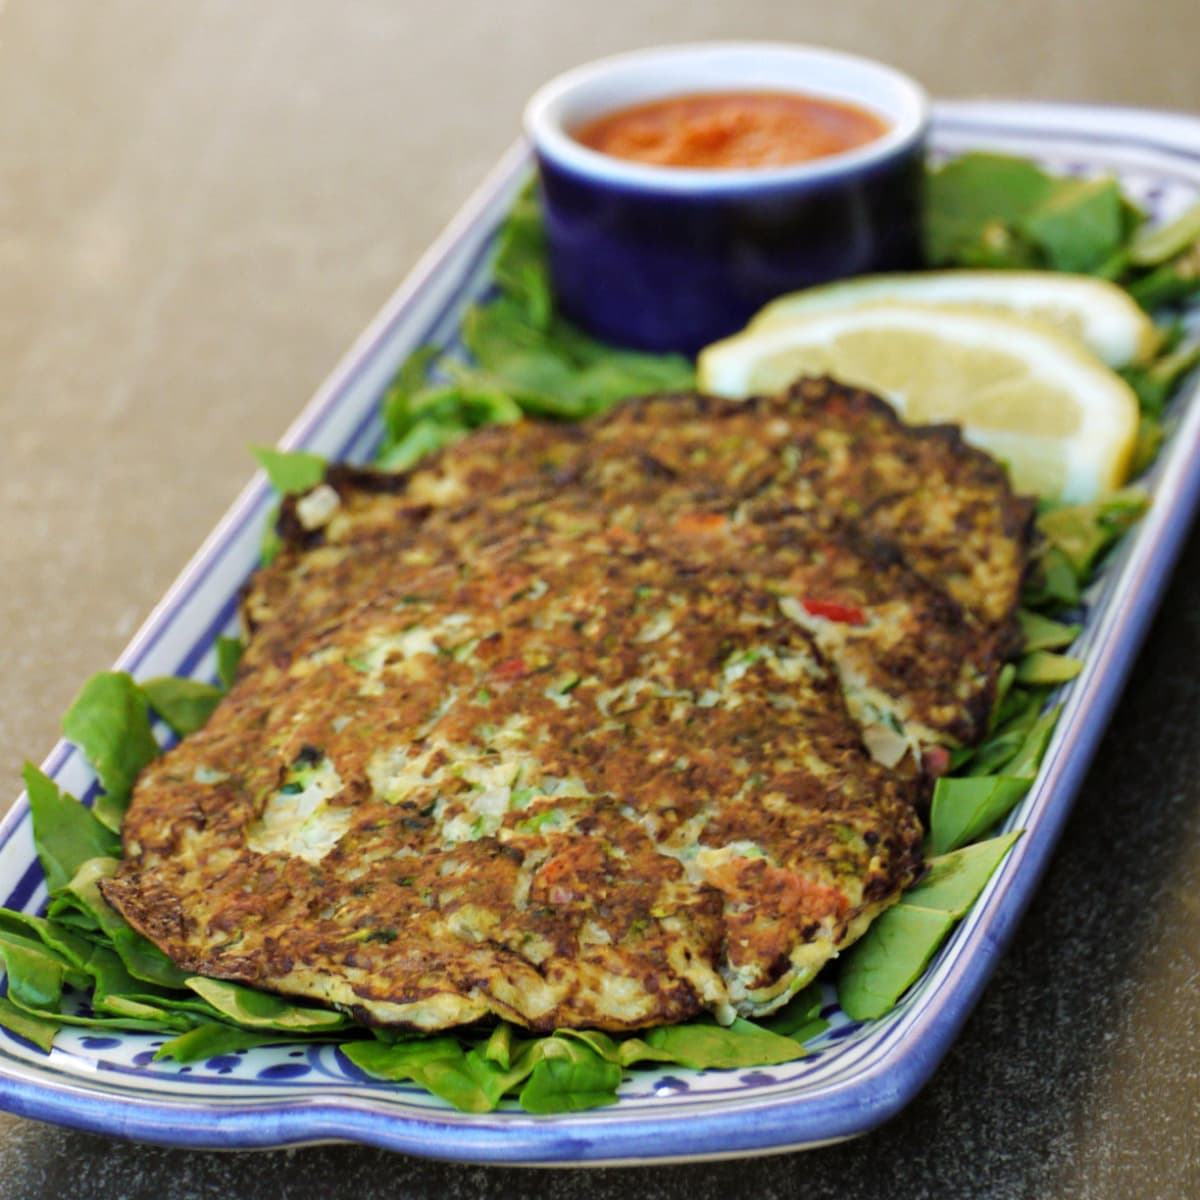 Three zucchini cakes on a bed of greens, with lemon slices and a small ramakin of sauce in the background. 